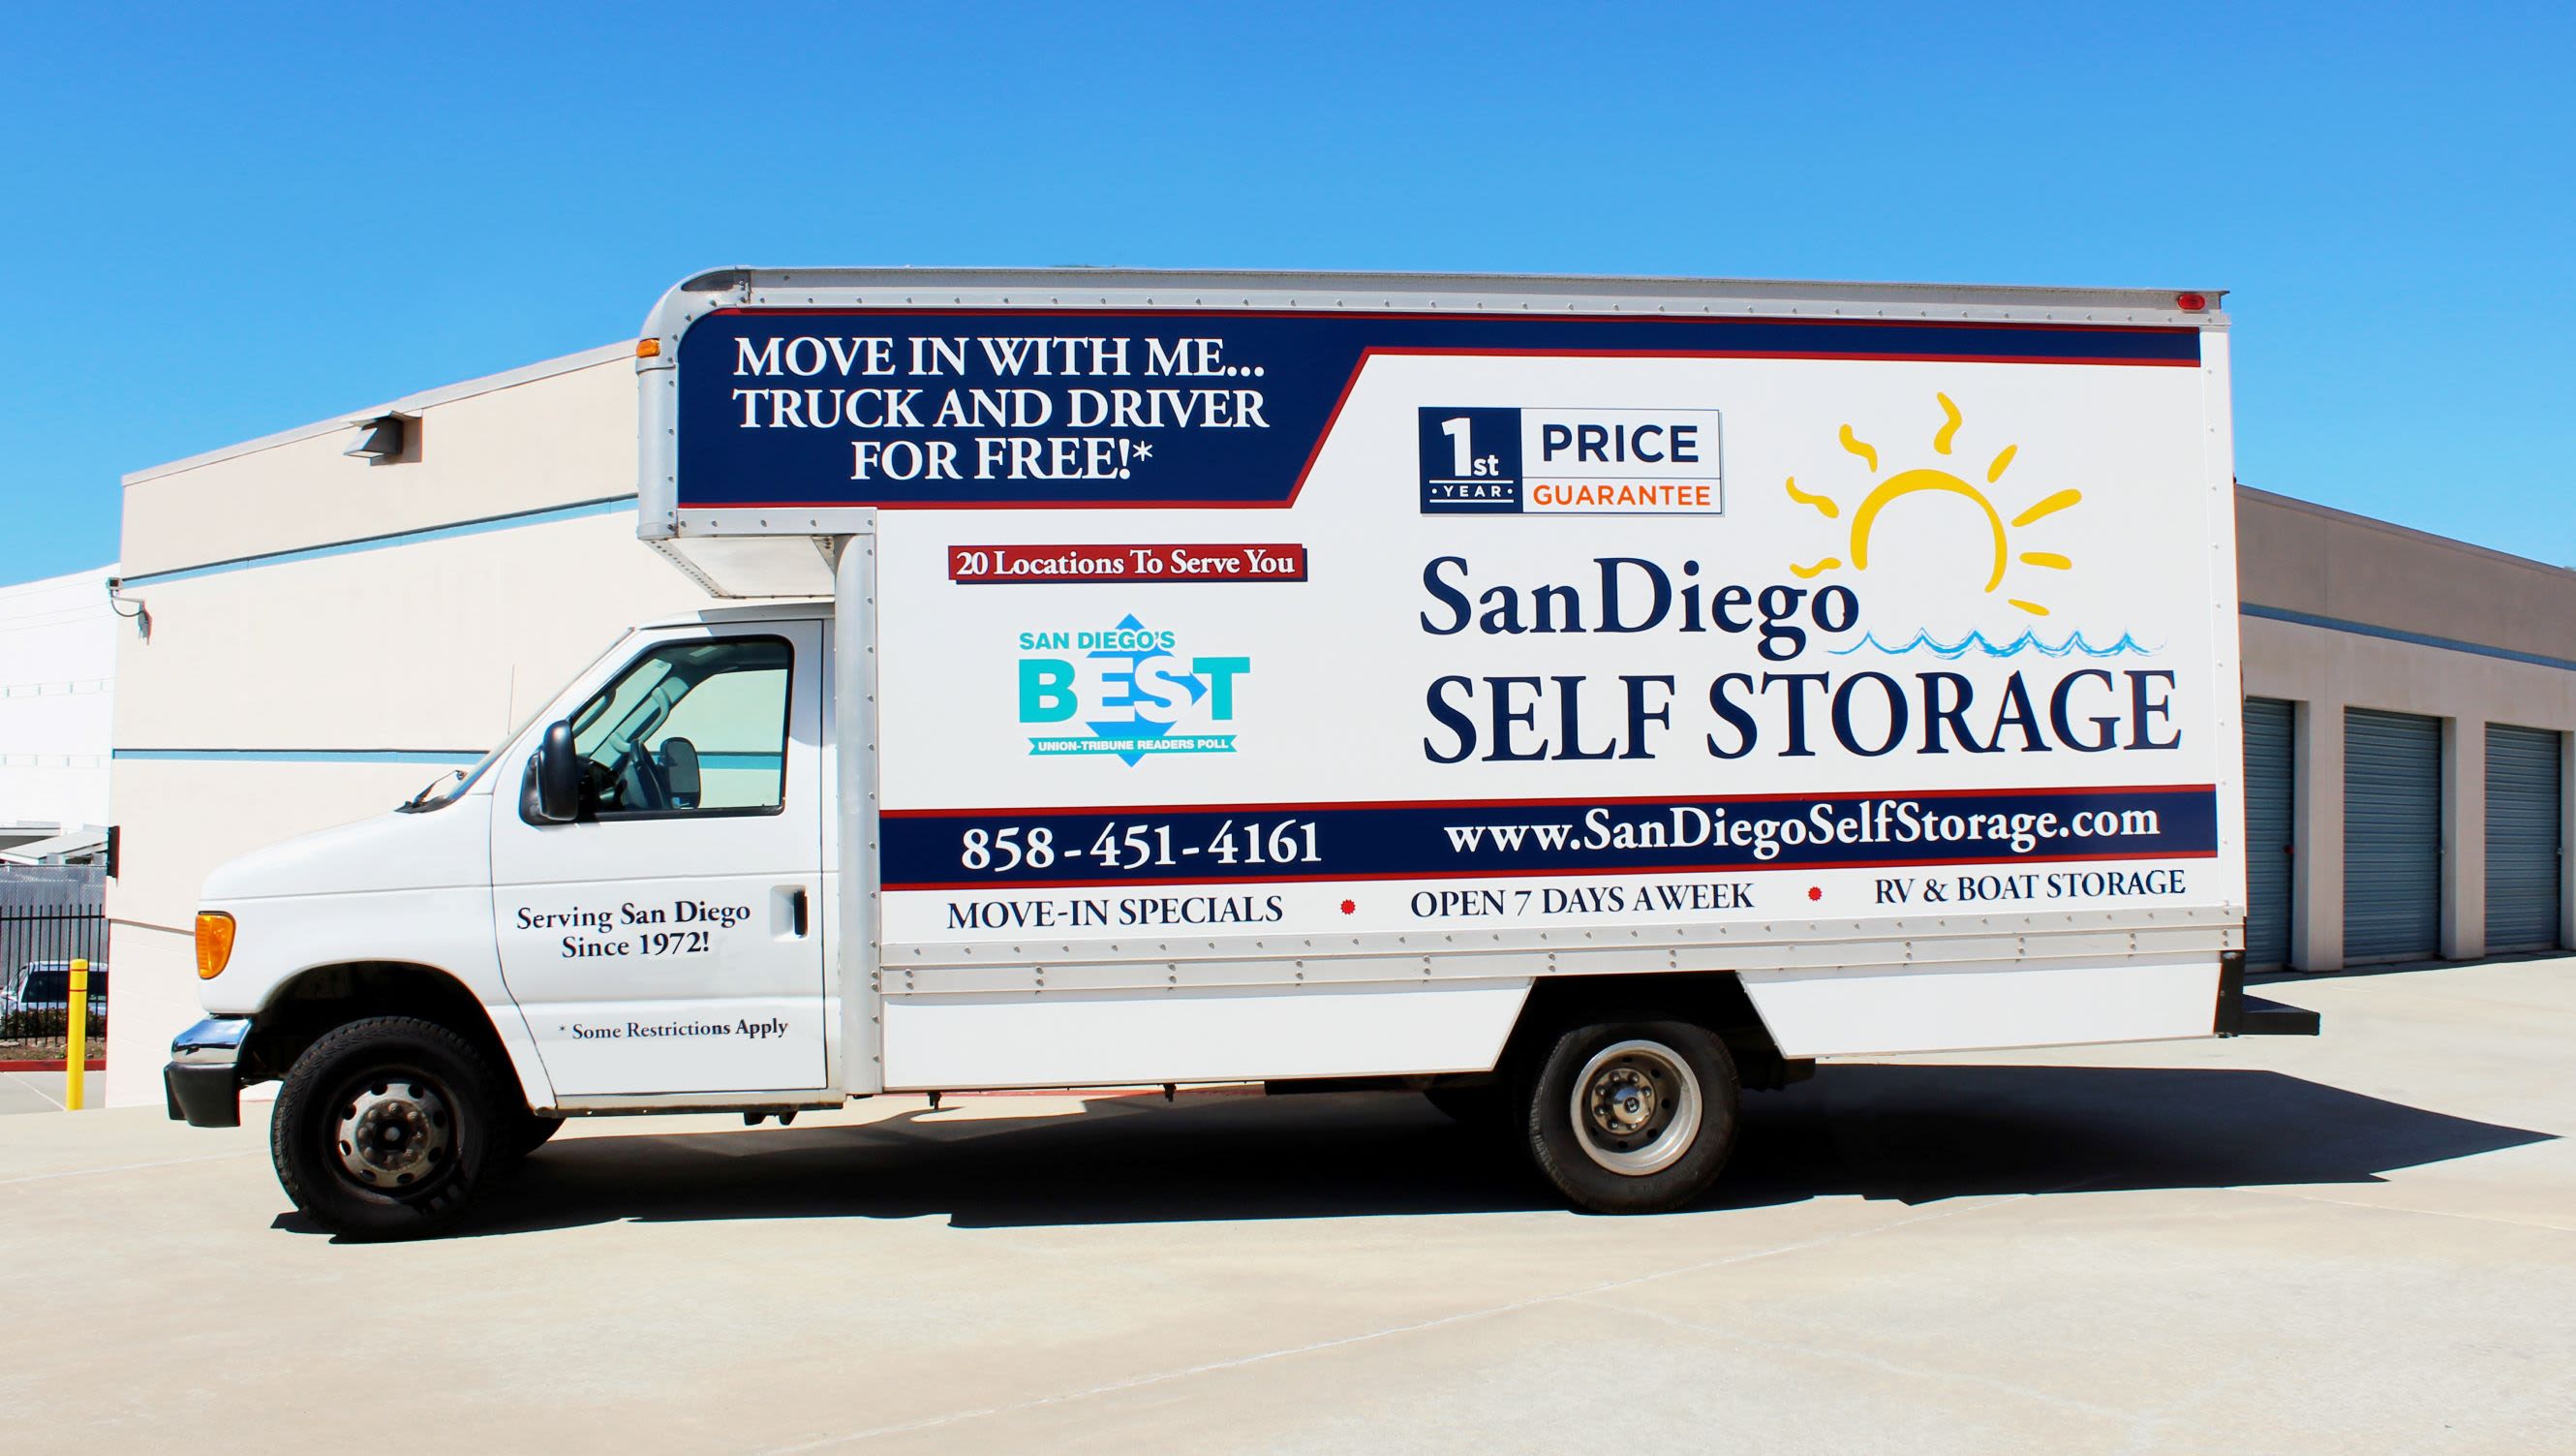 A moving truck at Otay Mesa Self Storage in San Diego, CA